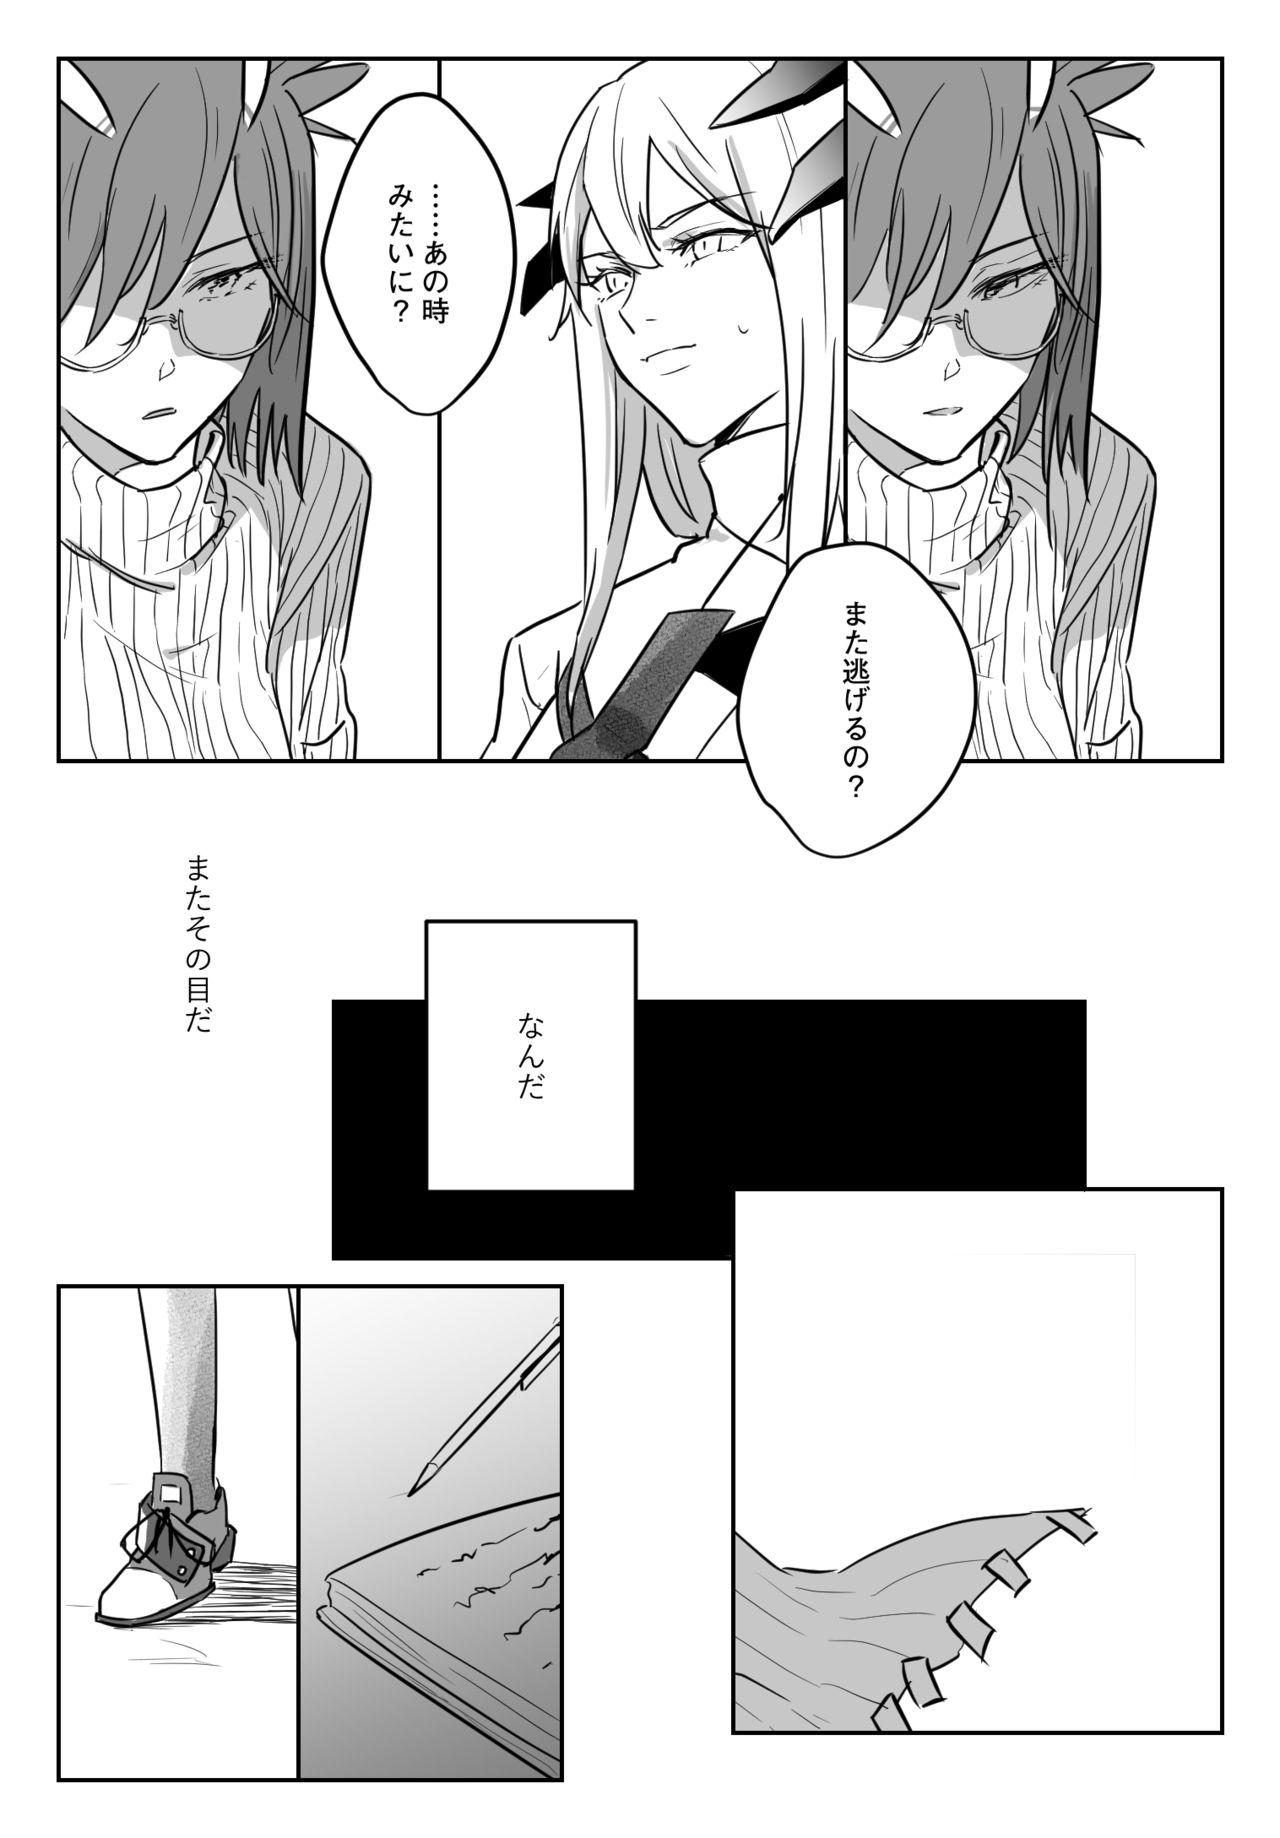 Squirters 龍性淫 - Arknights Newbie - Page 6